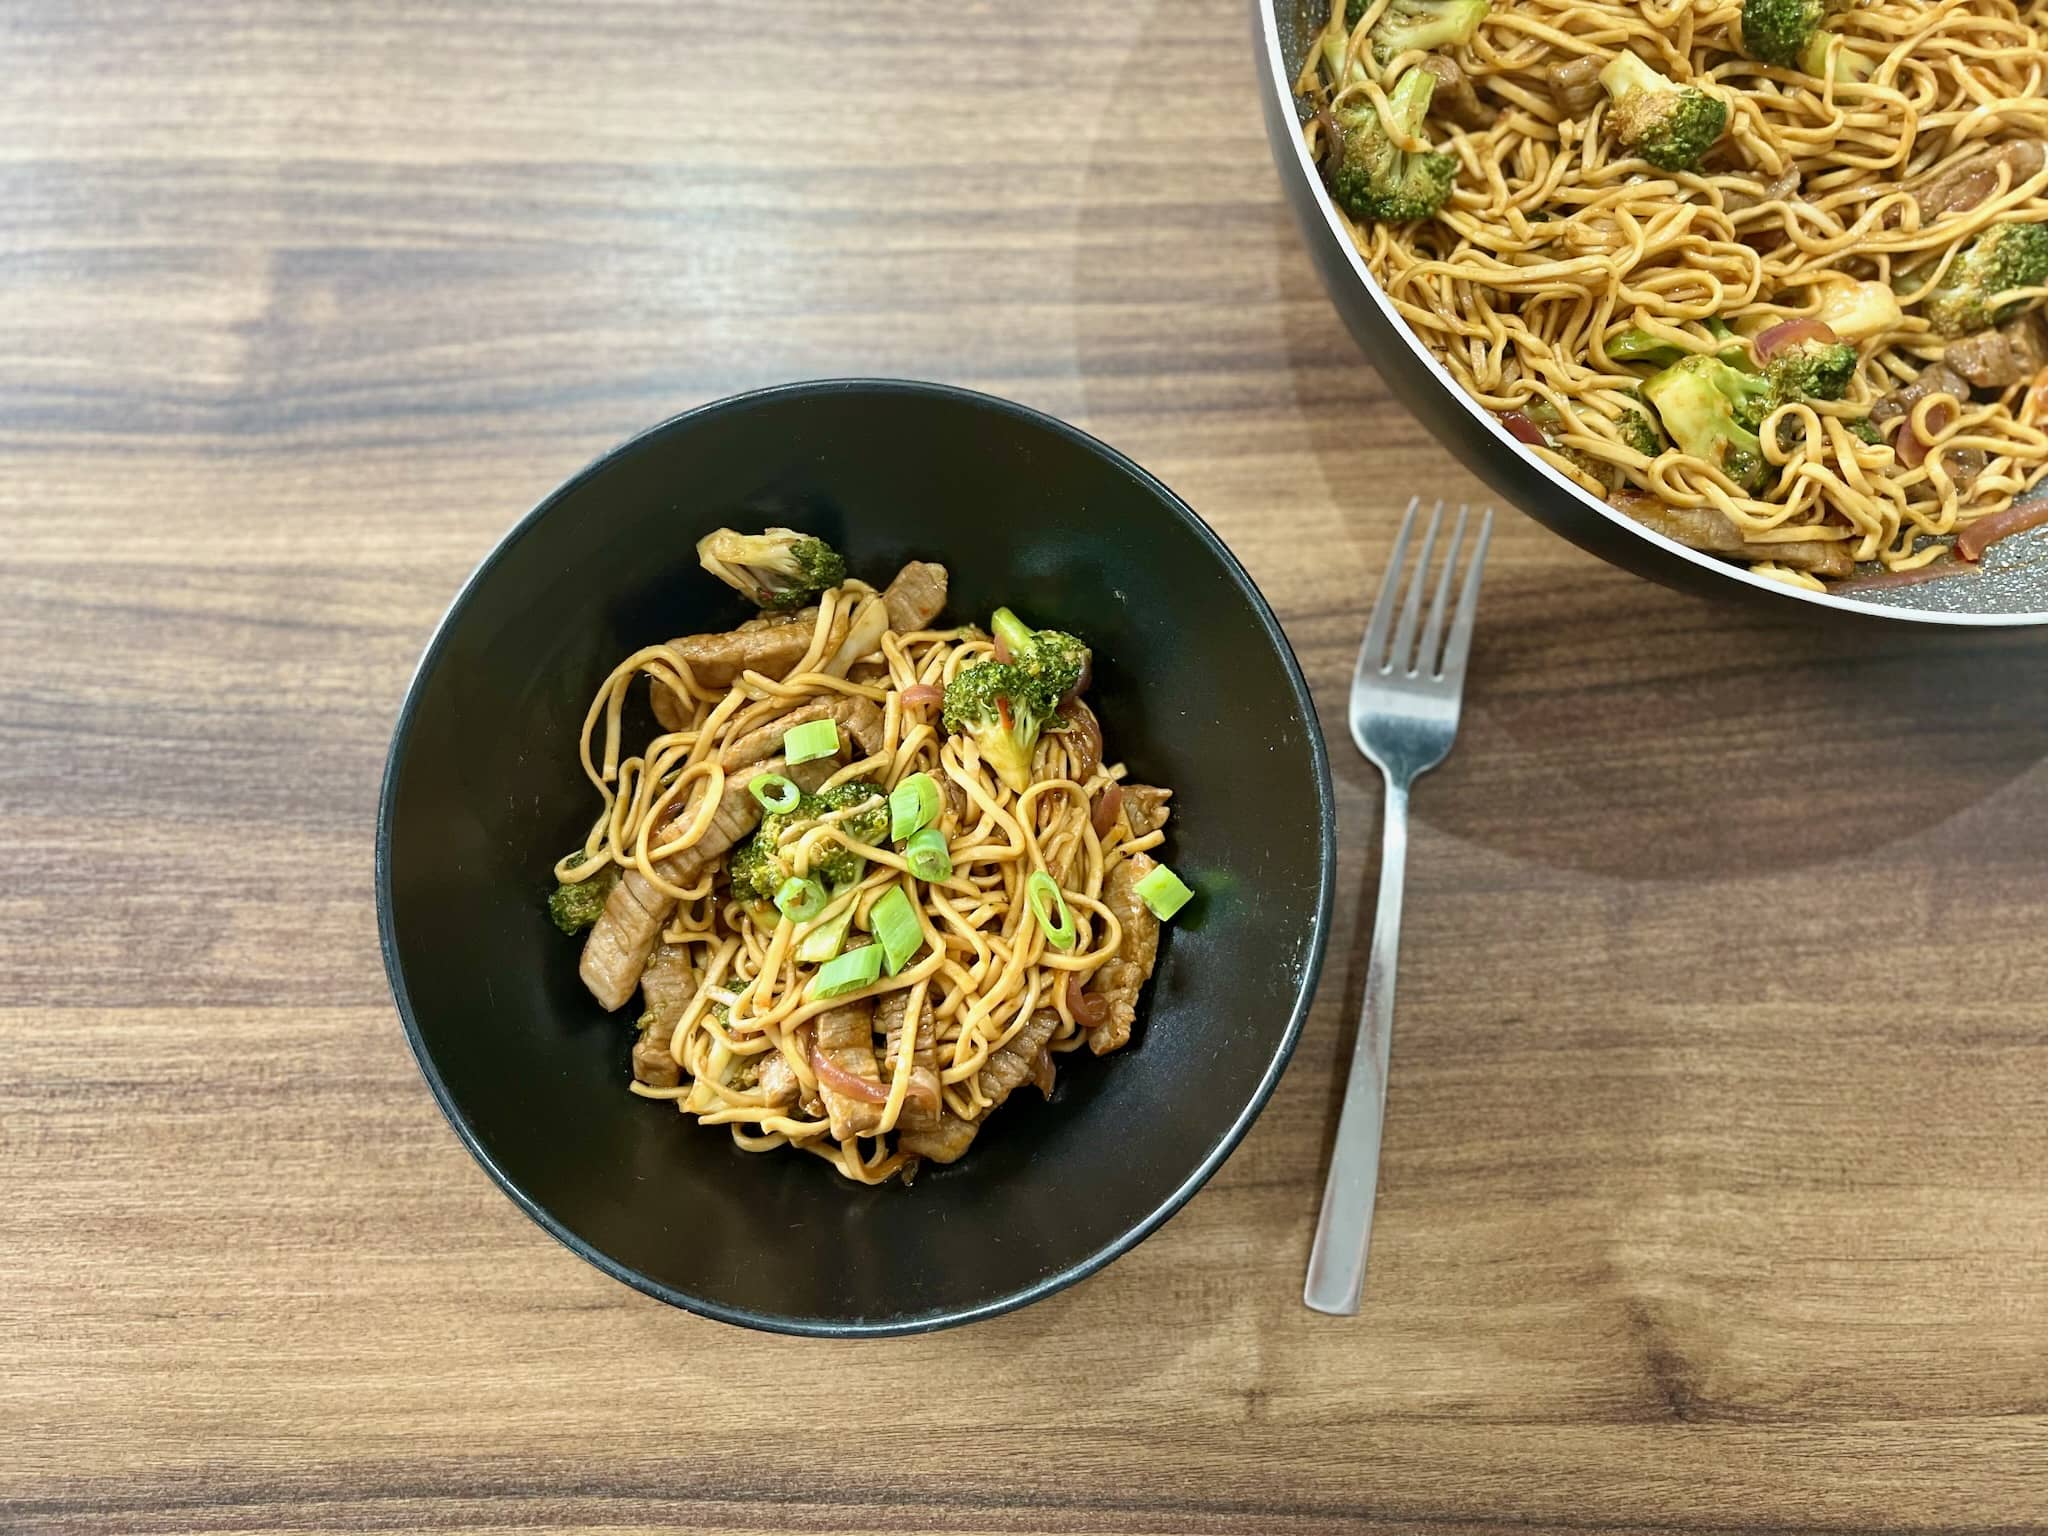 A portion of Beef Steak Stir Fry Noodles in a bowl on the tabletop with the rest in a pan on a side